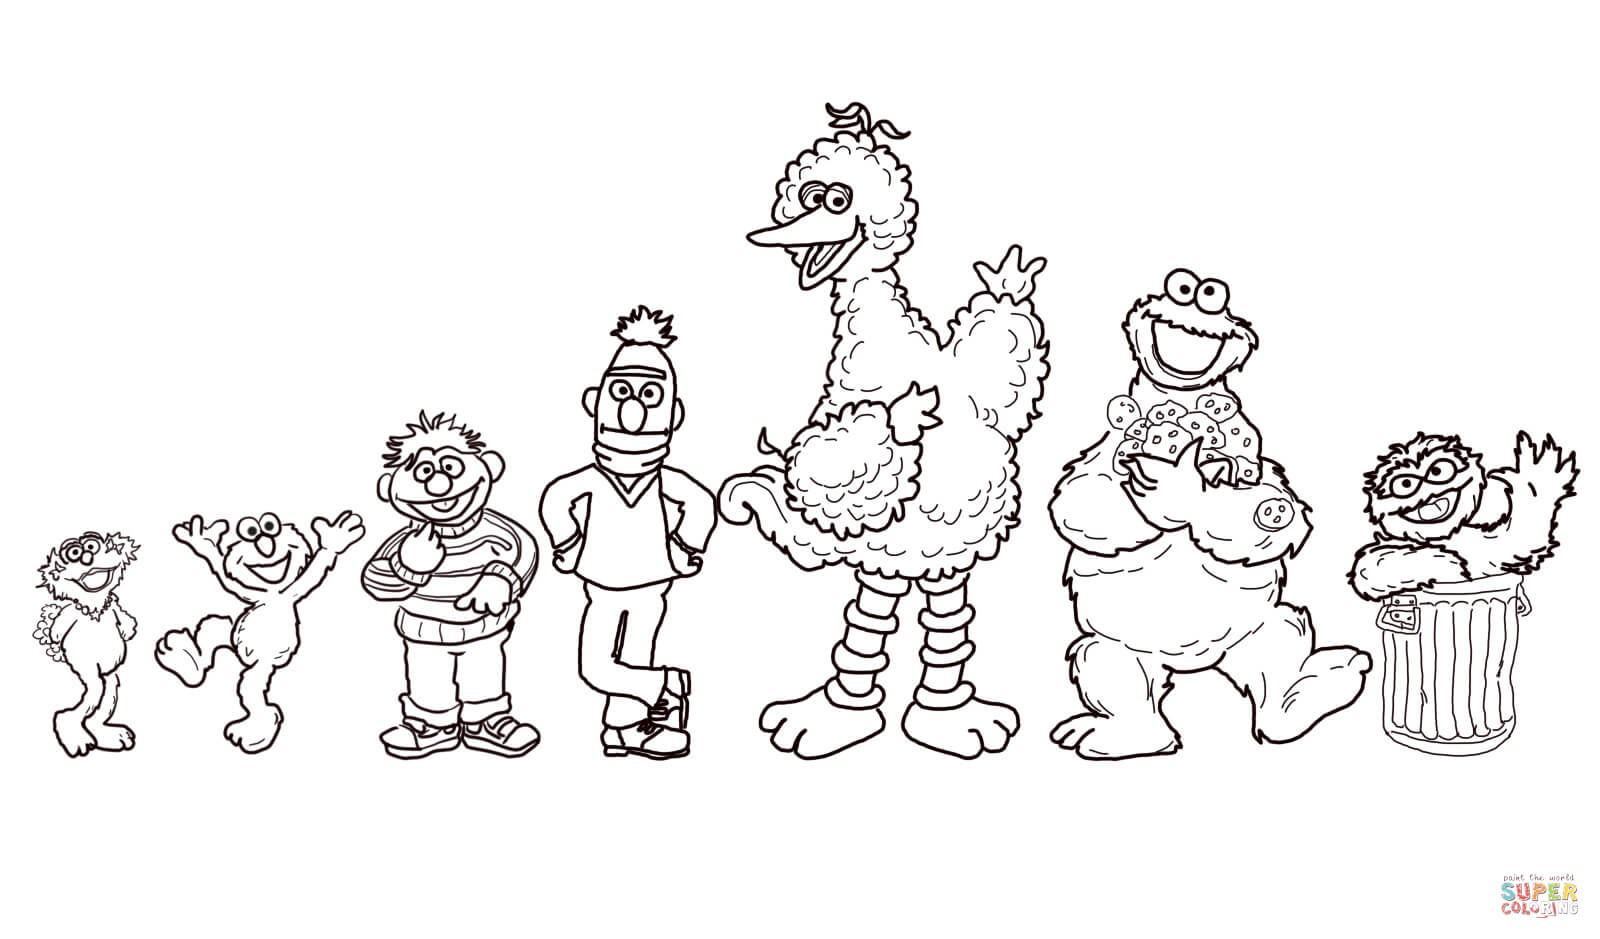 Sesame Street Characters coloring page | Free Printable Coloring Pages